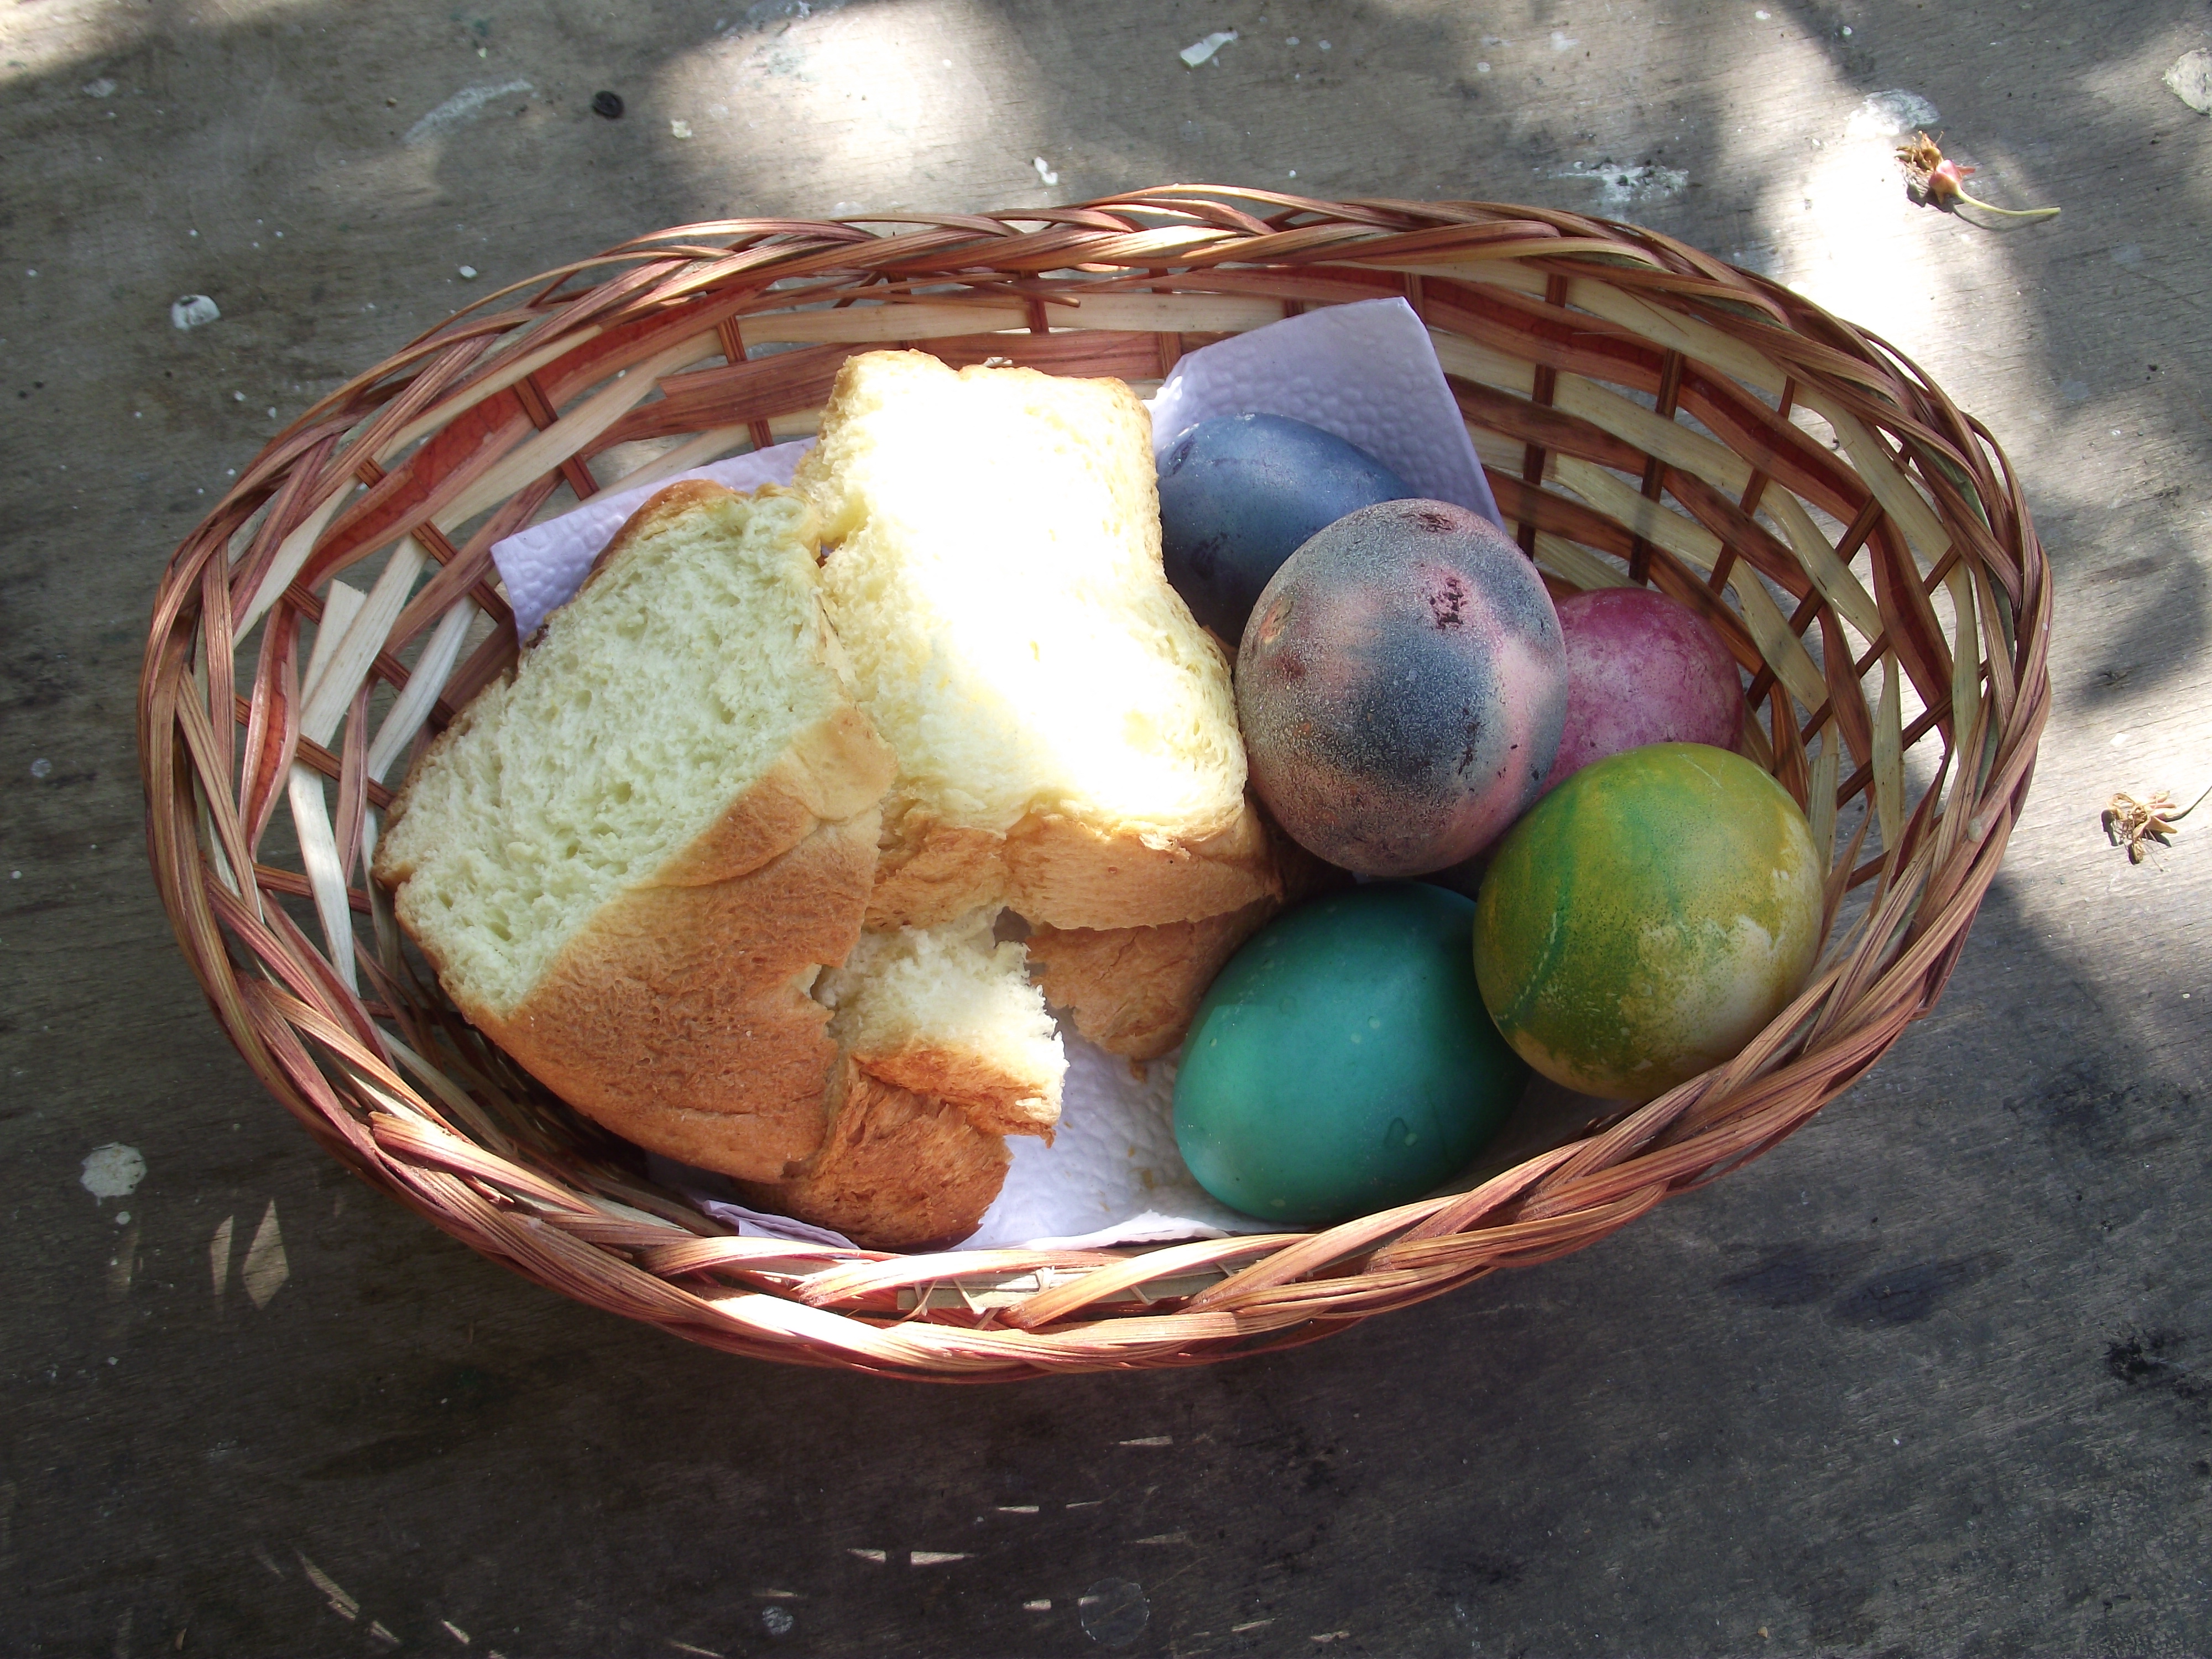 Painted eggs and sweet bread as gifts over easter from our neighbours